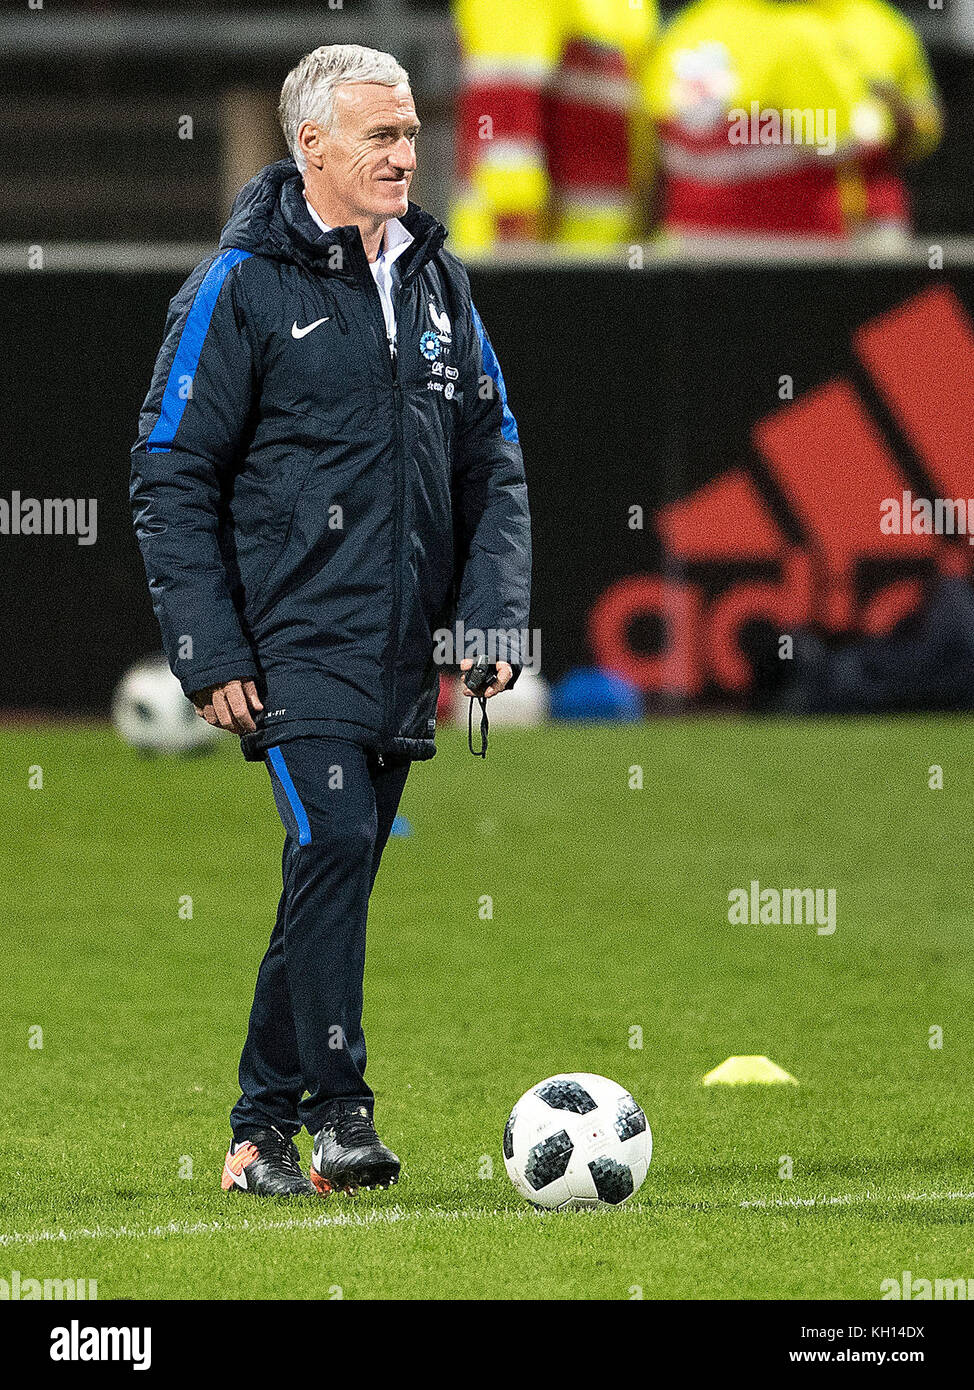 Cologne, Germany. 13th Nov, 2017. Coach of the French national soccer team,  Didier Deschamps standing beside a football during the final training of  the French national soccer team at the Suedstadion stadium